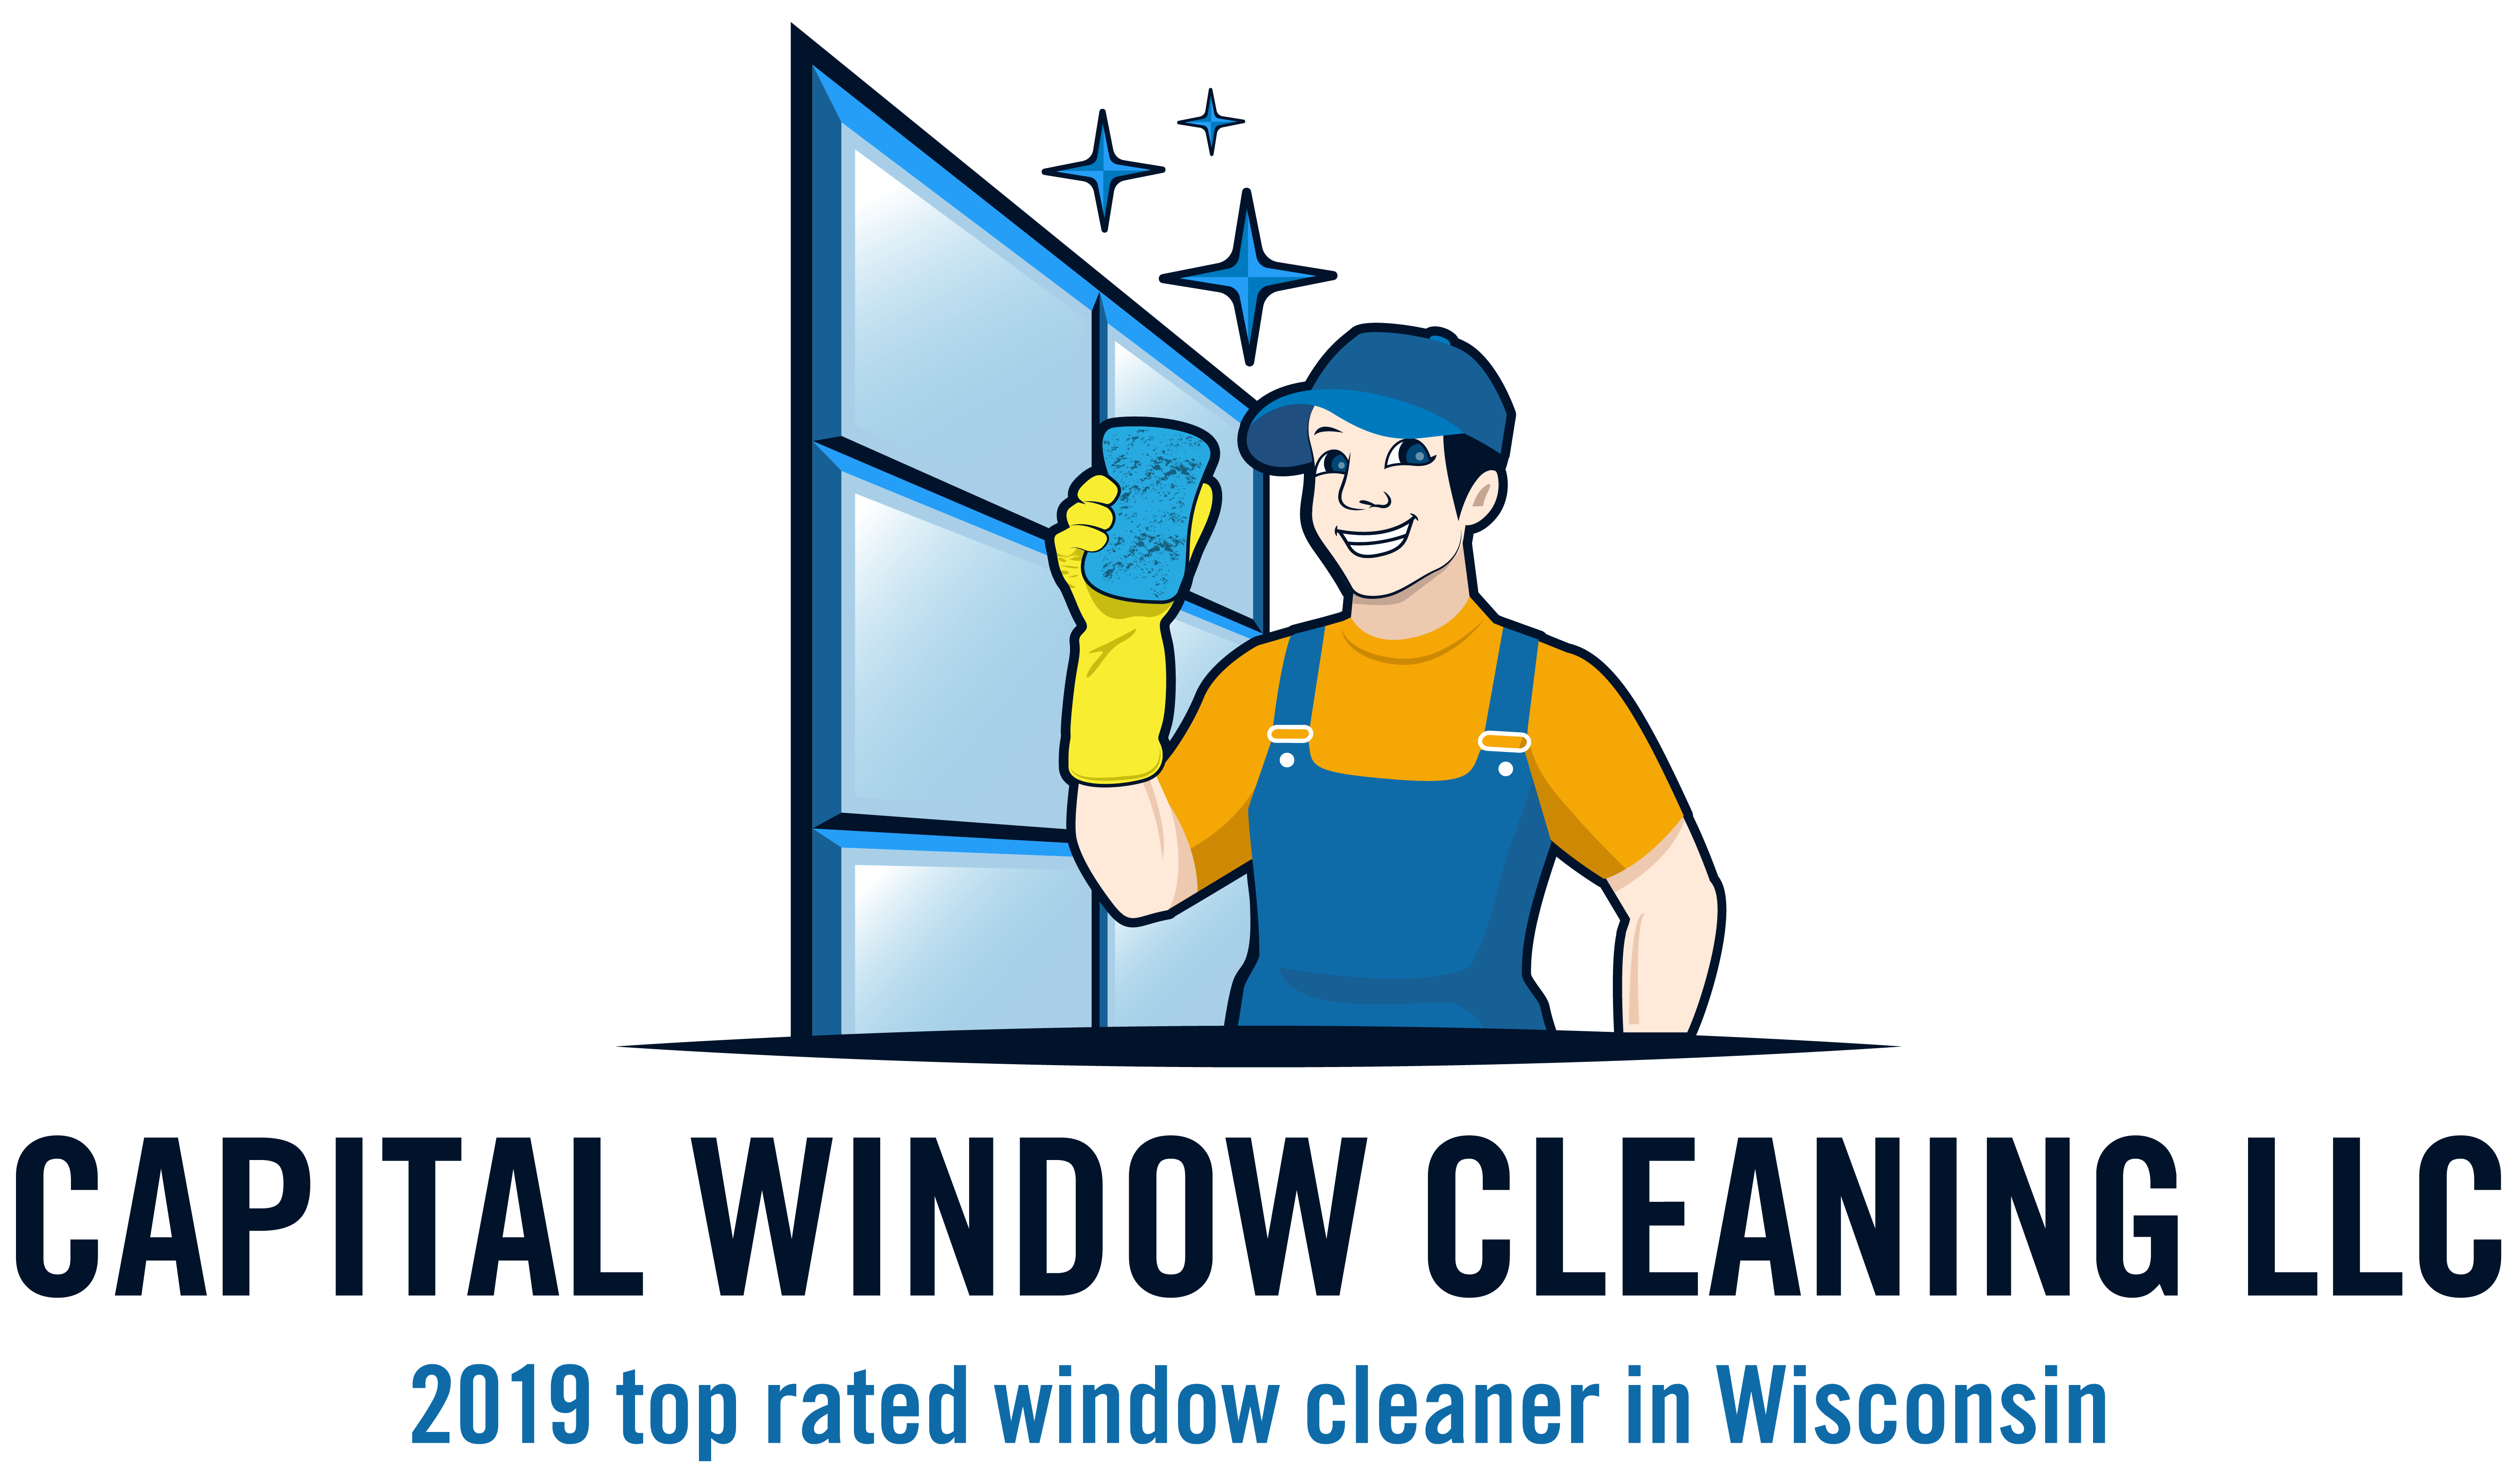 Capital Window Cleaning